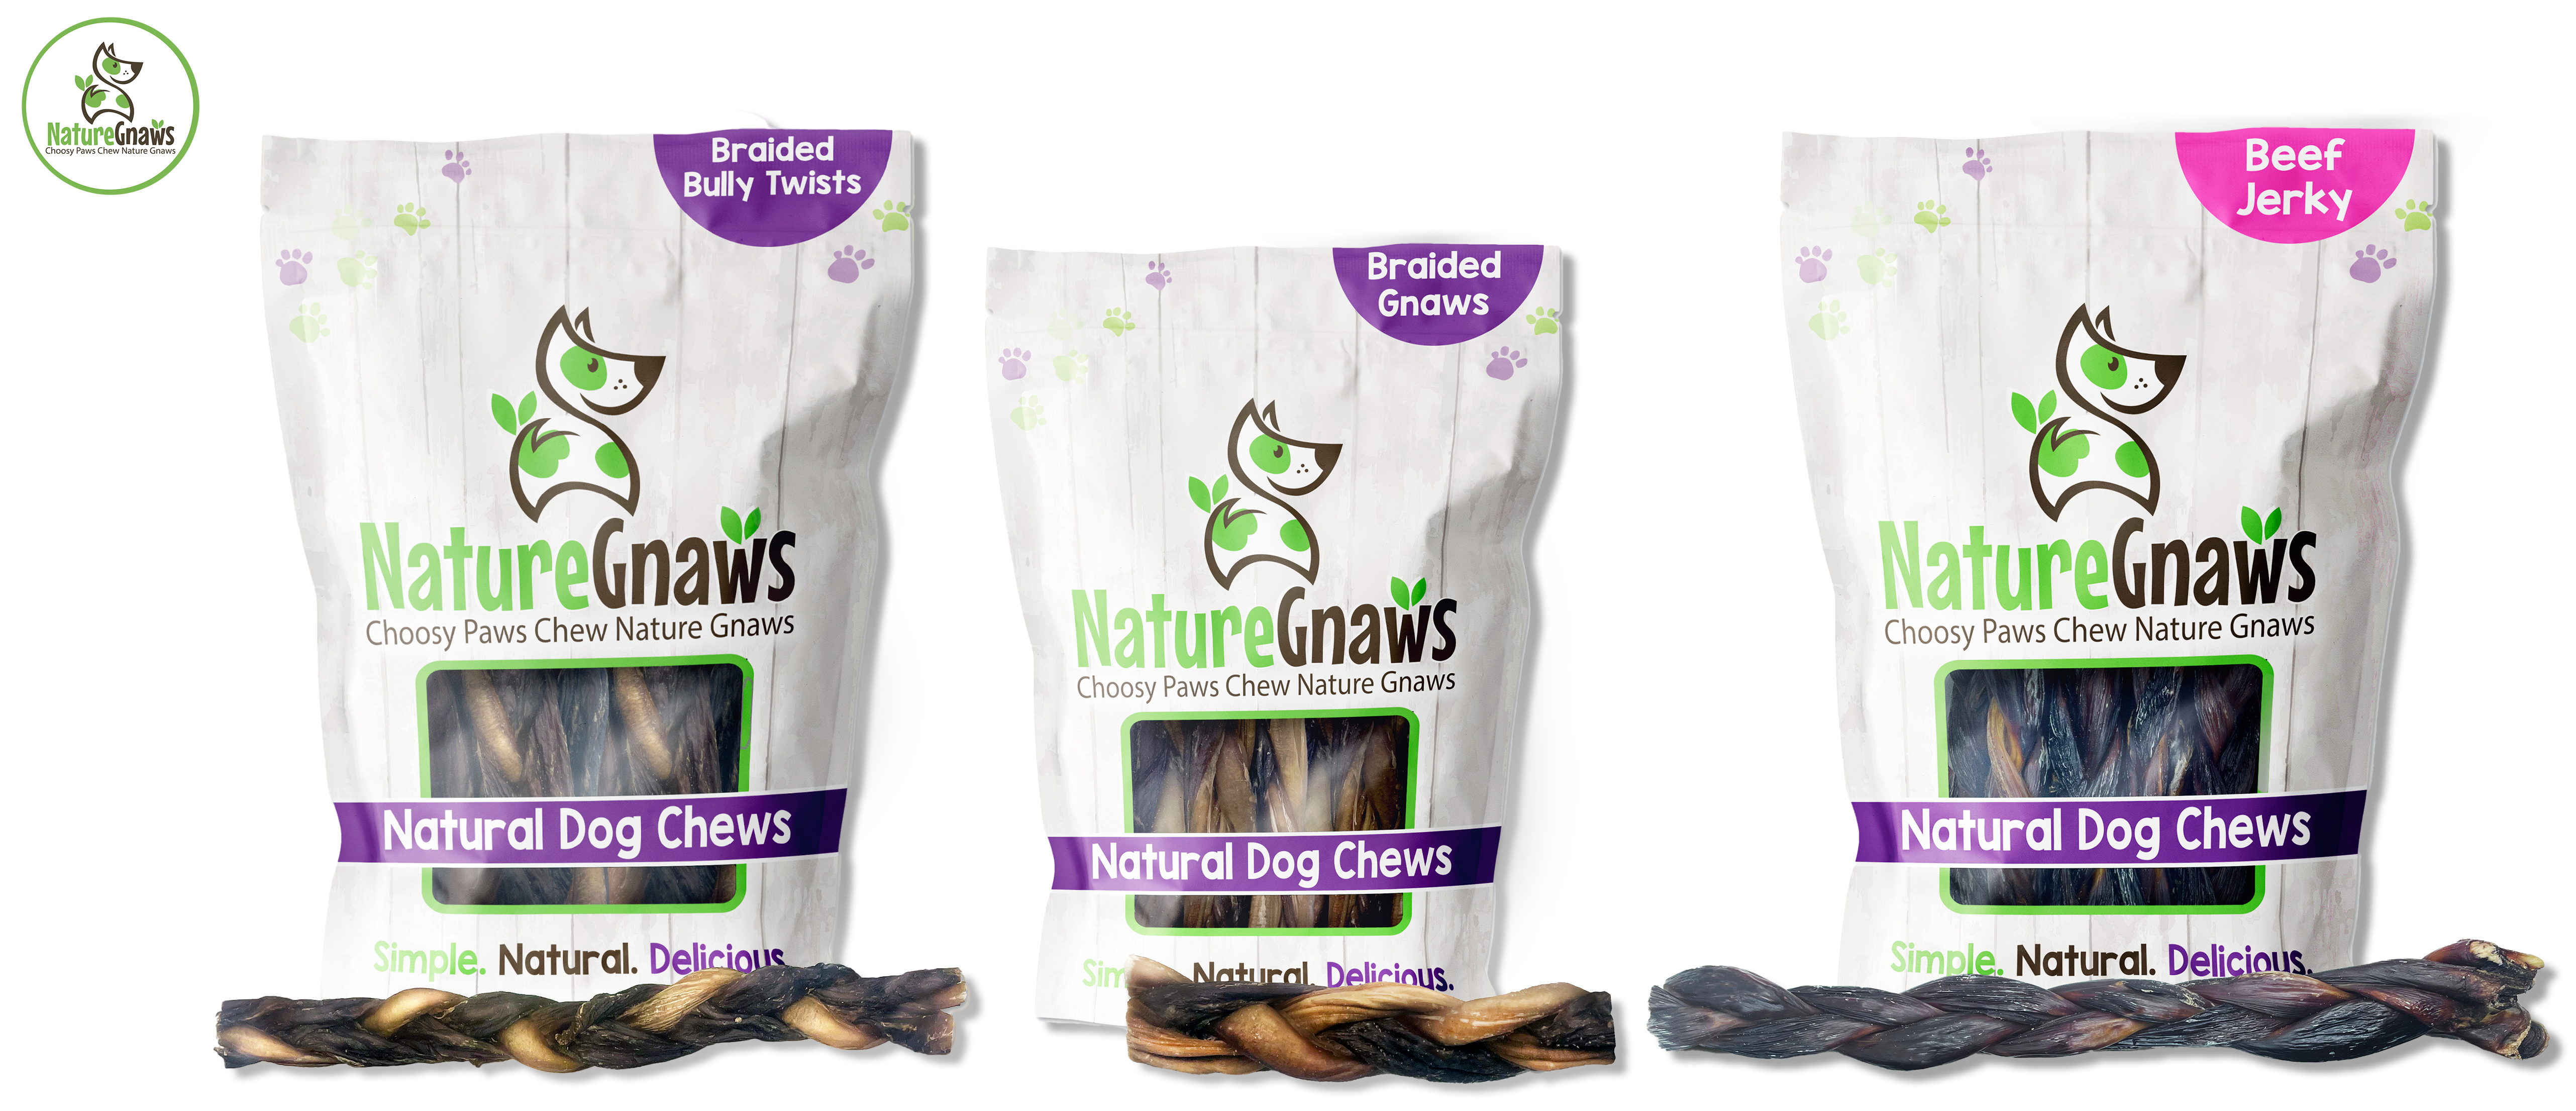 Nature-Gnaws-braided-chews.png